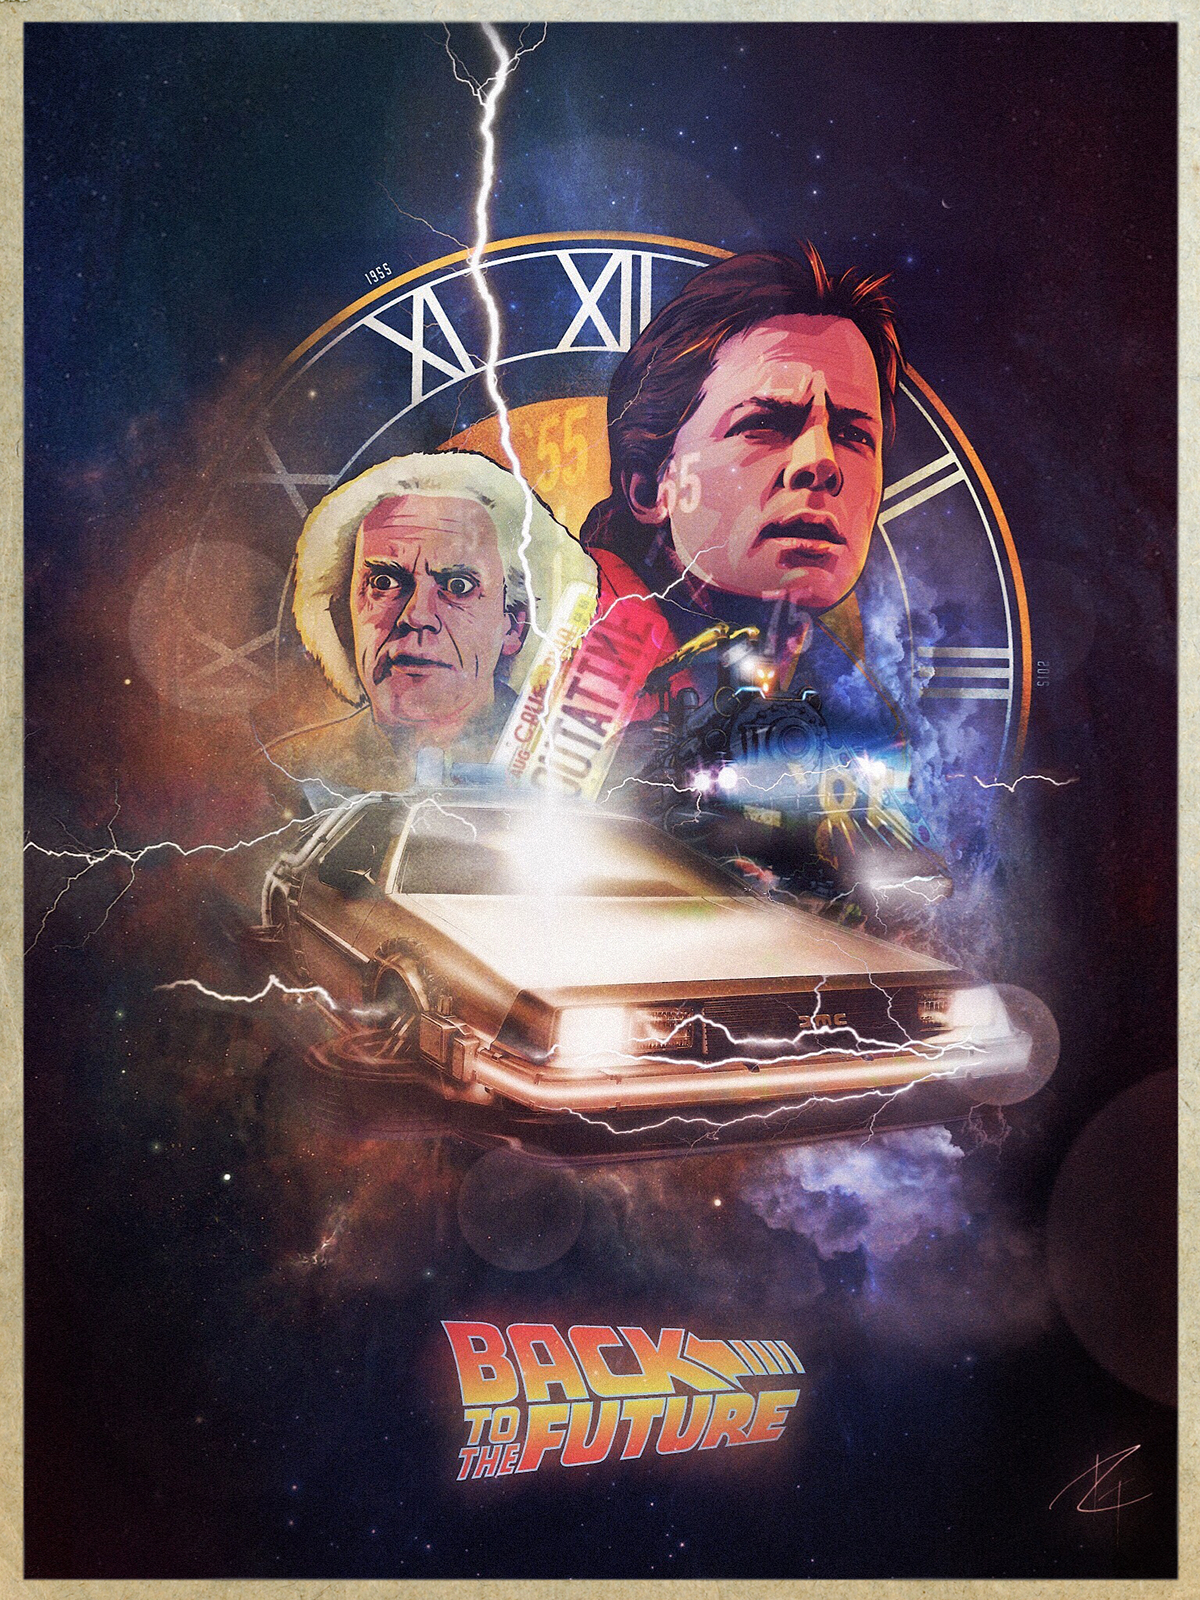 backtothefuture marty mcfly BIFF hillvalley DeLorean